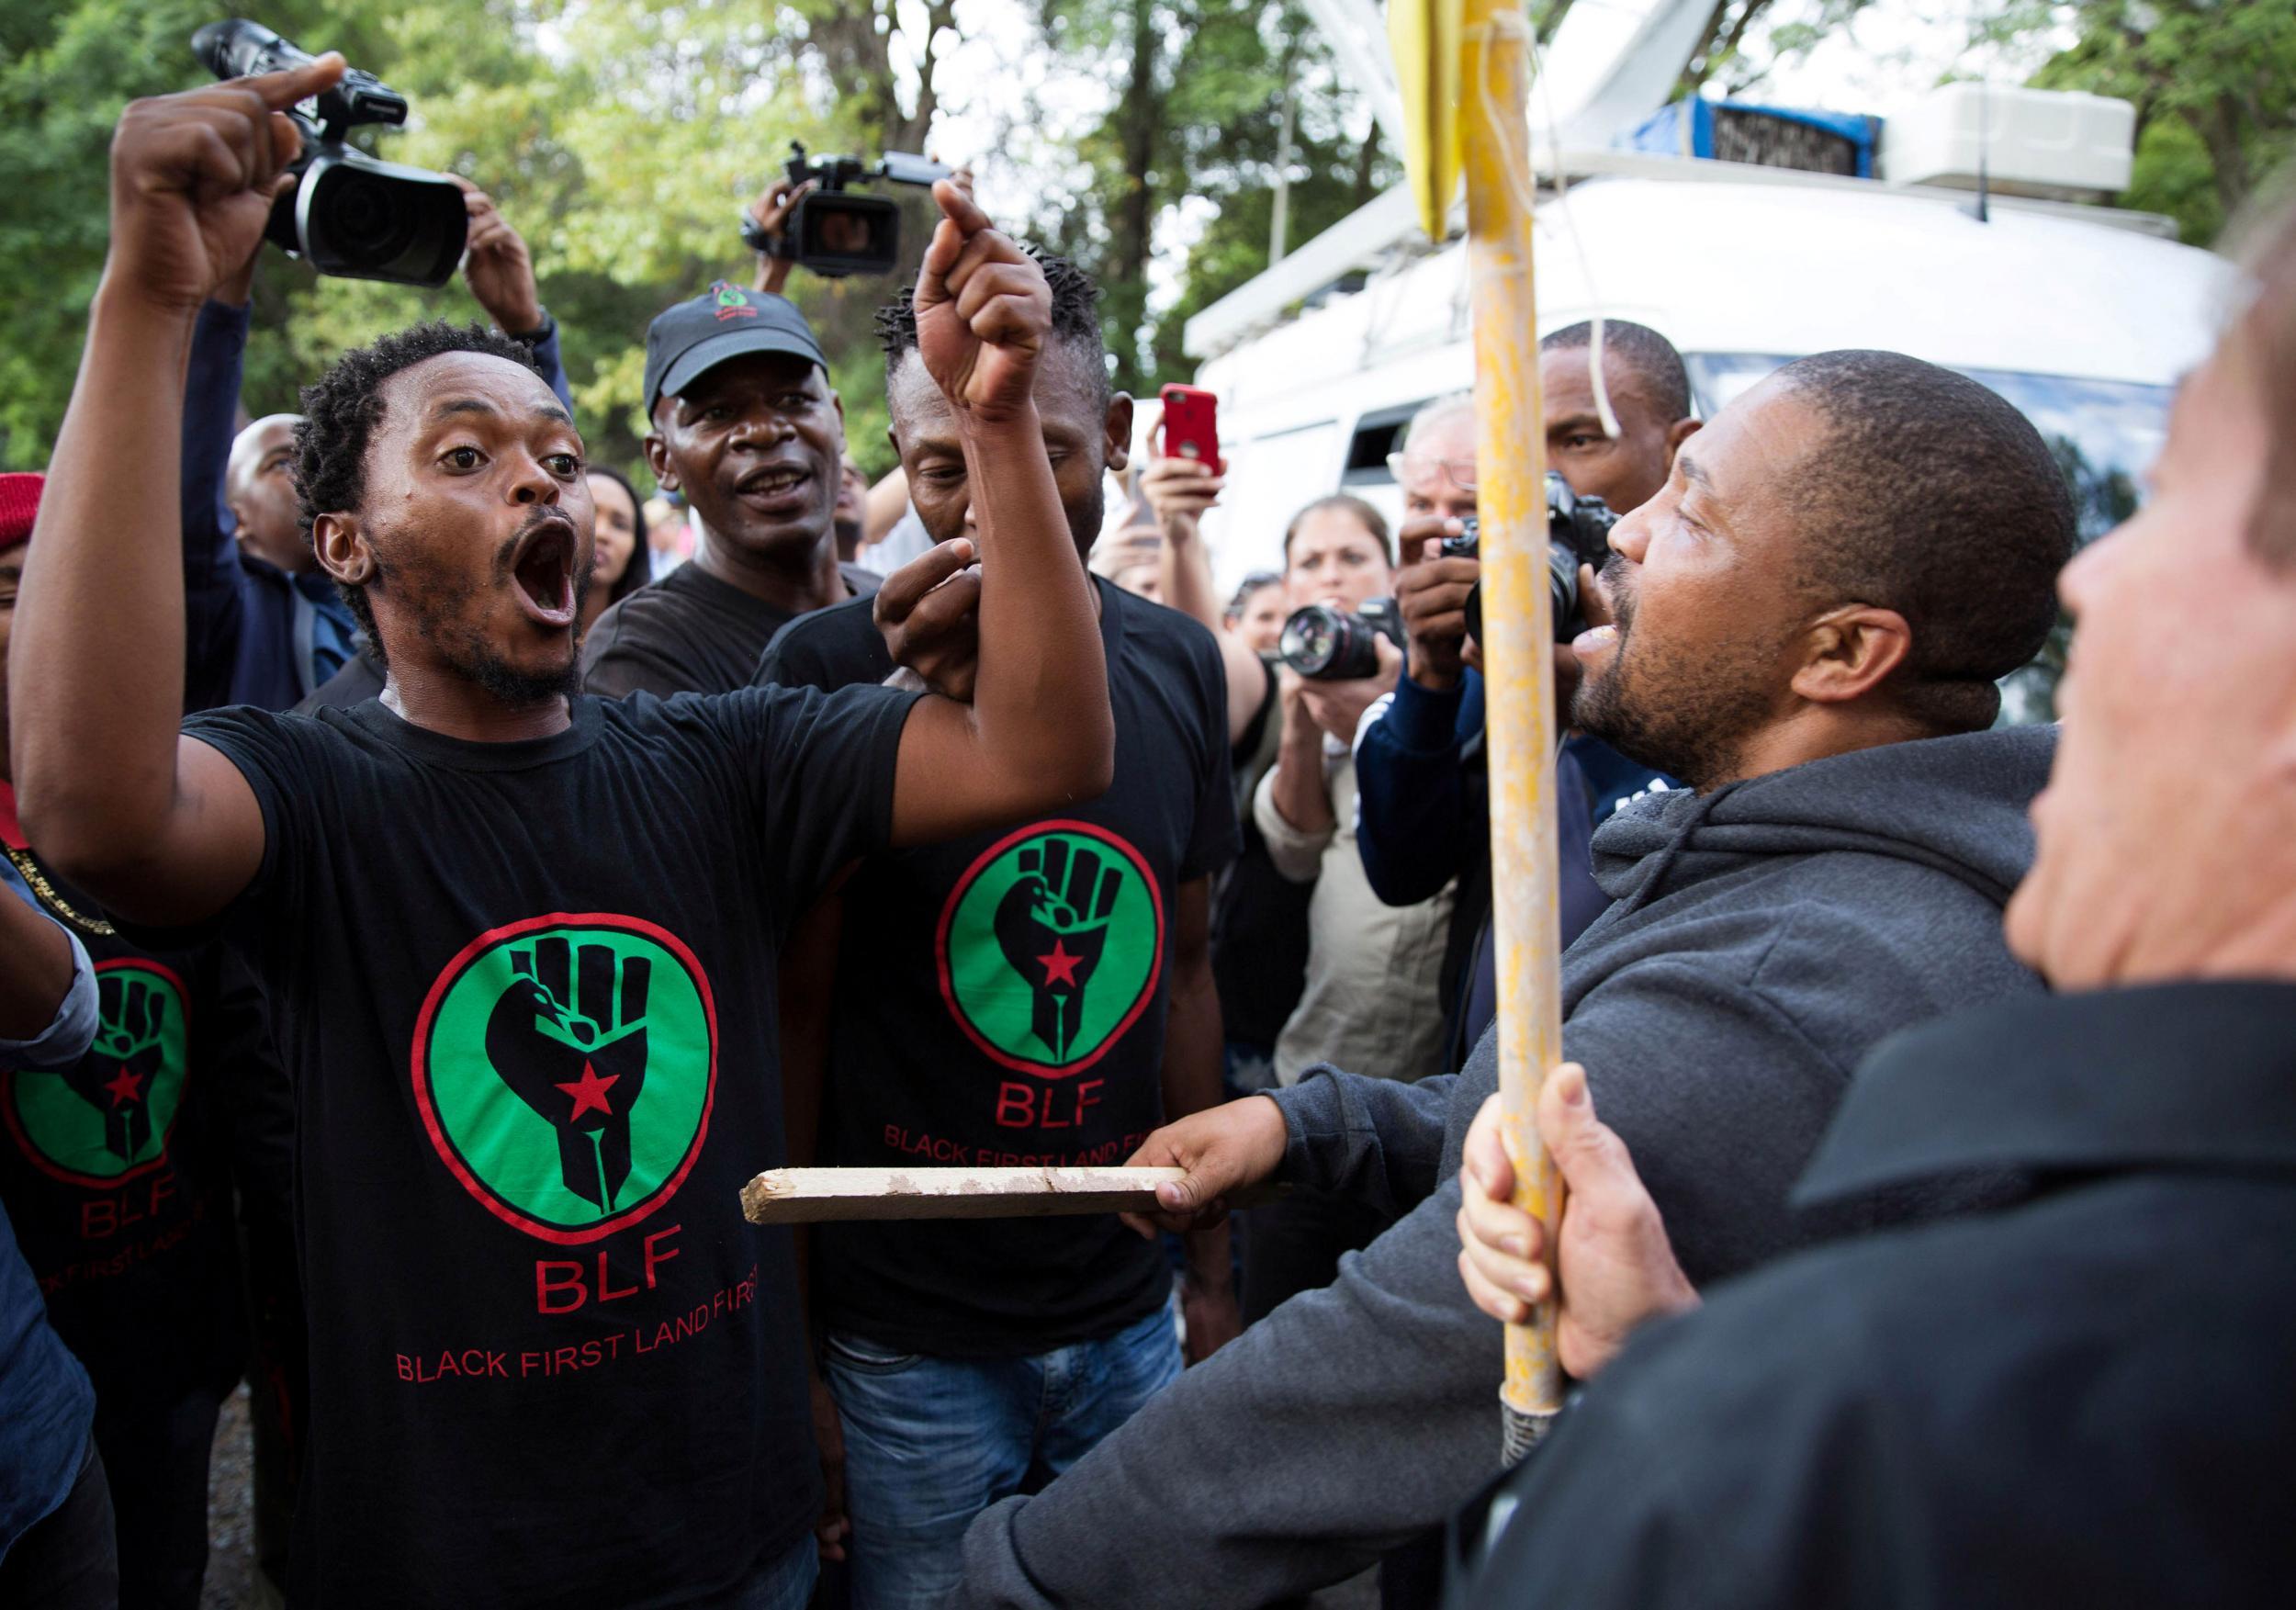 Supporters of President Jacob Zuma confront demonstrators calling for Zuma's removal outside the home of the controversial Gupta family in Johannesburg